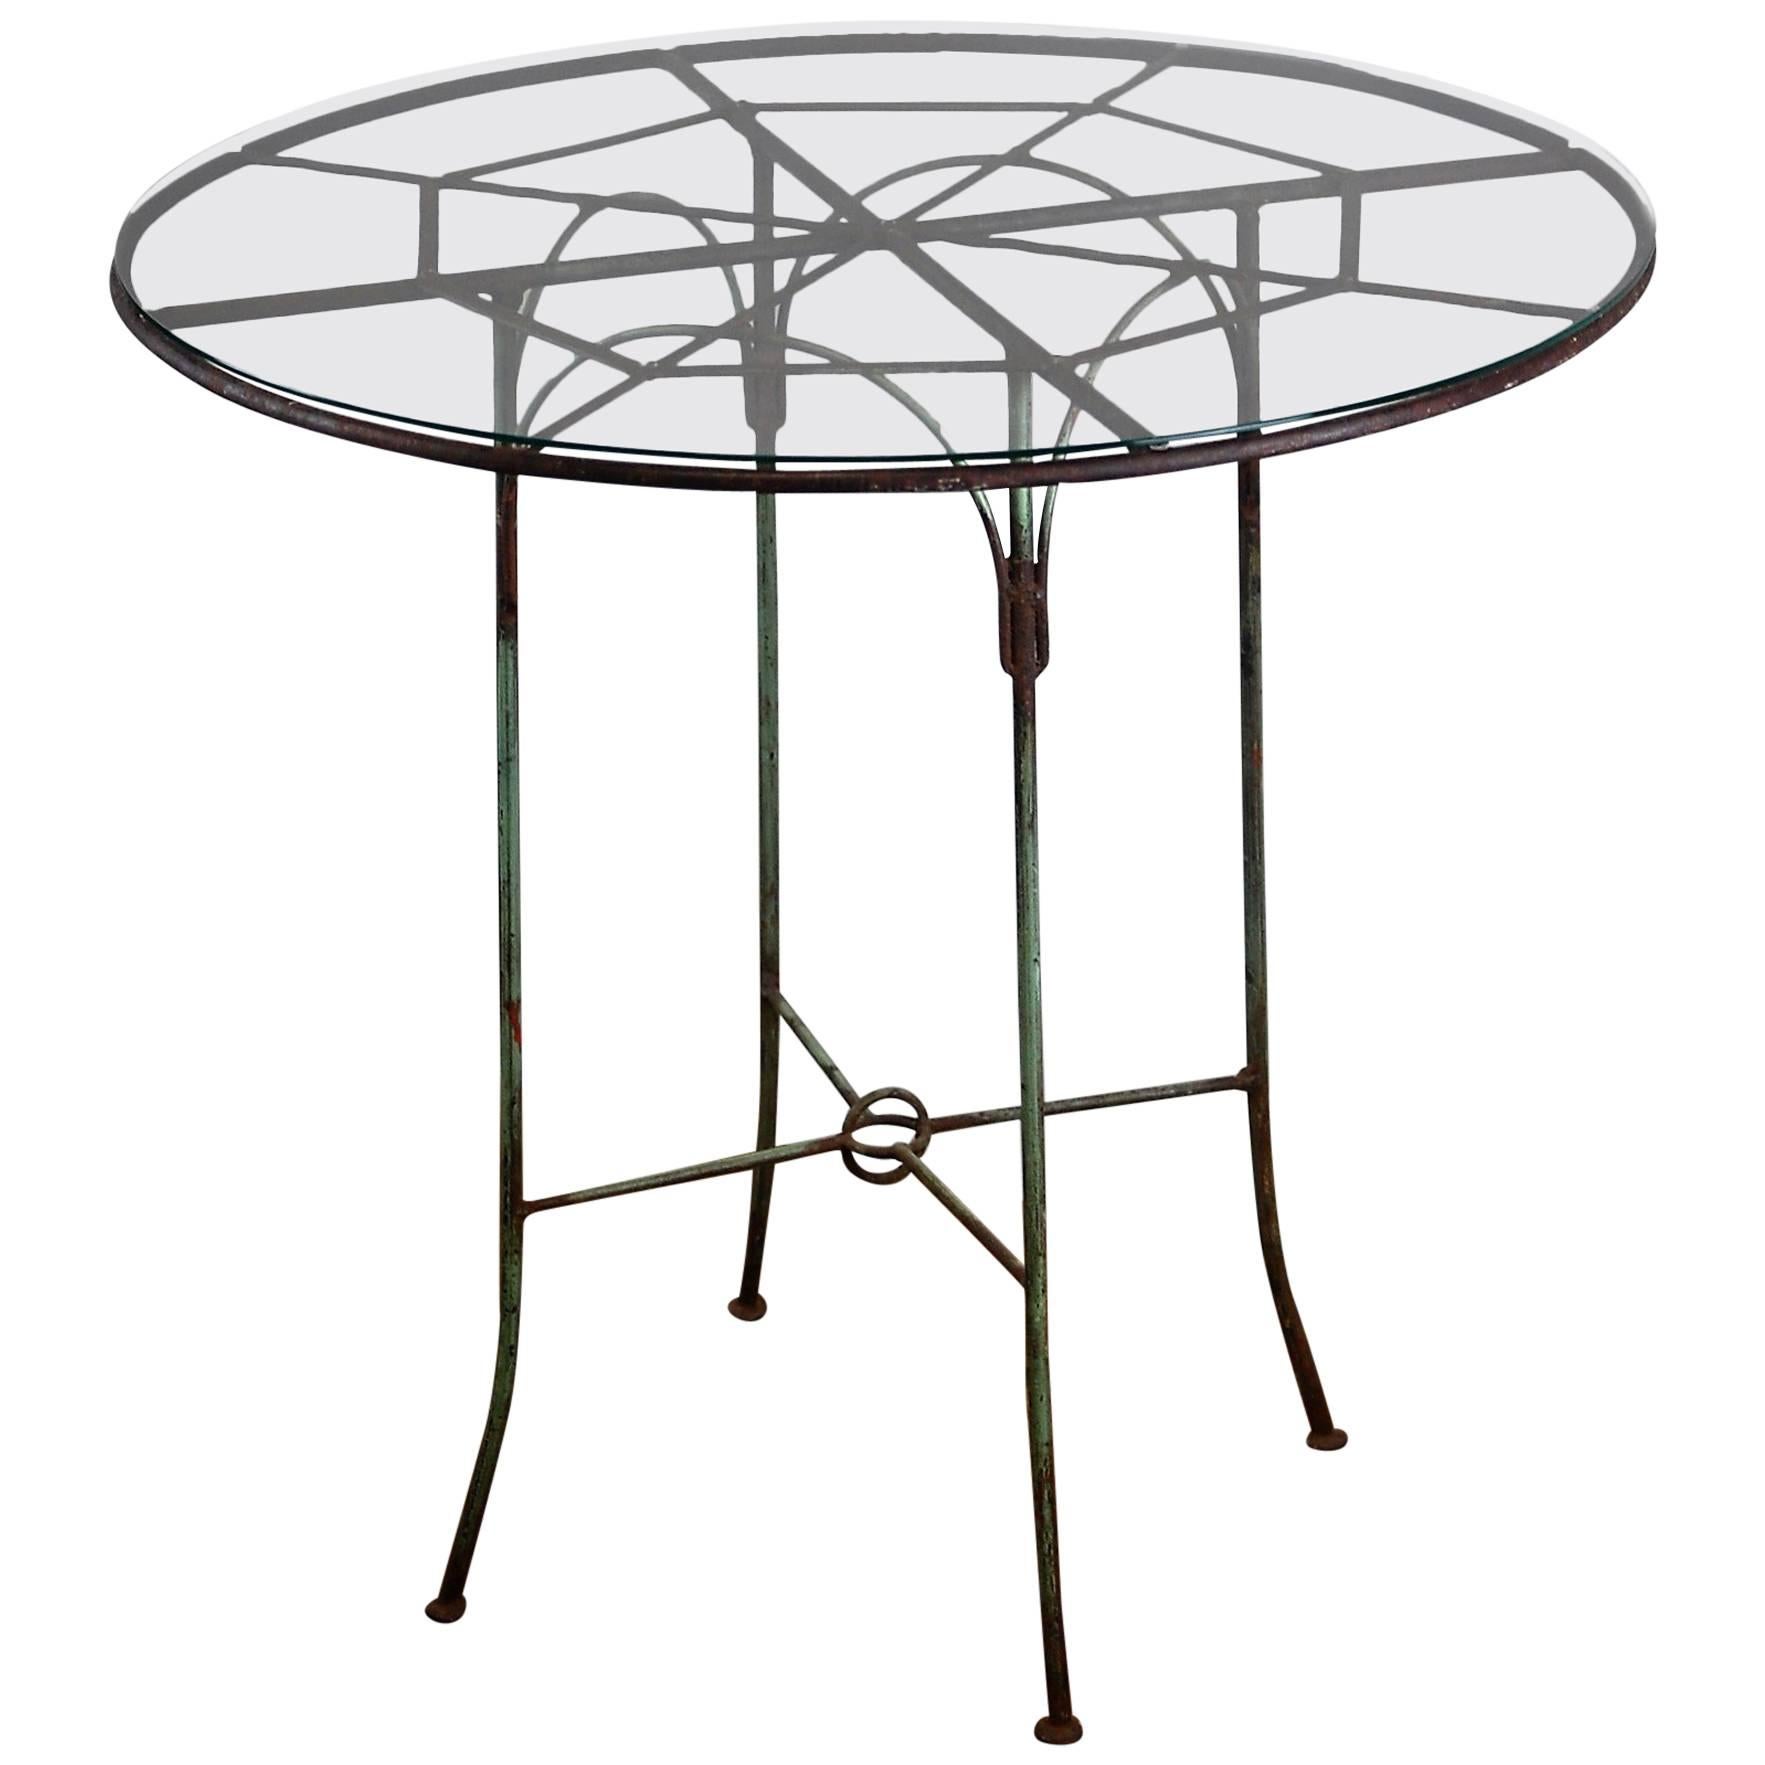 Early 20th Century Wrought Iron Spiders Web Cafe Table